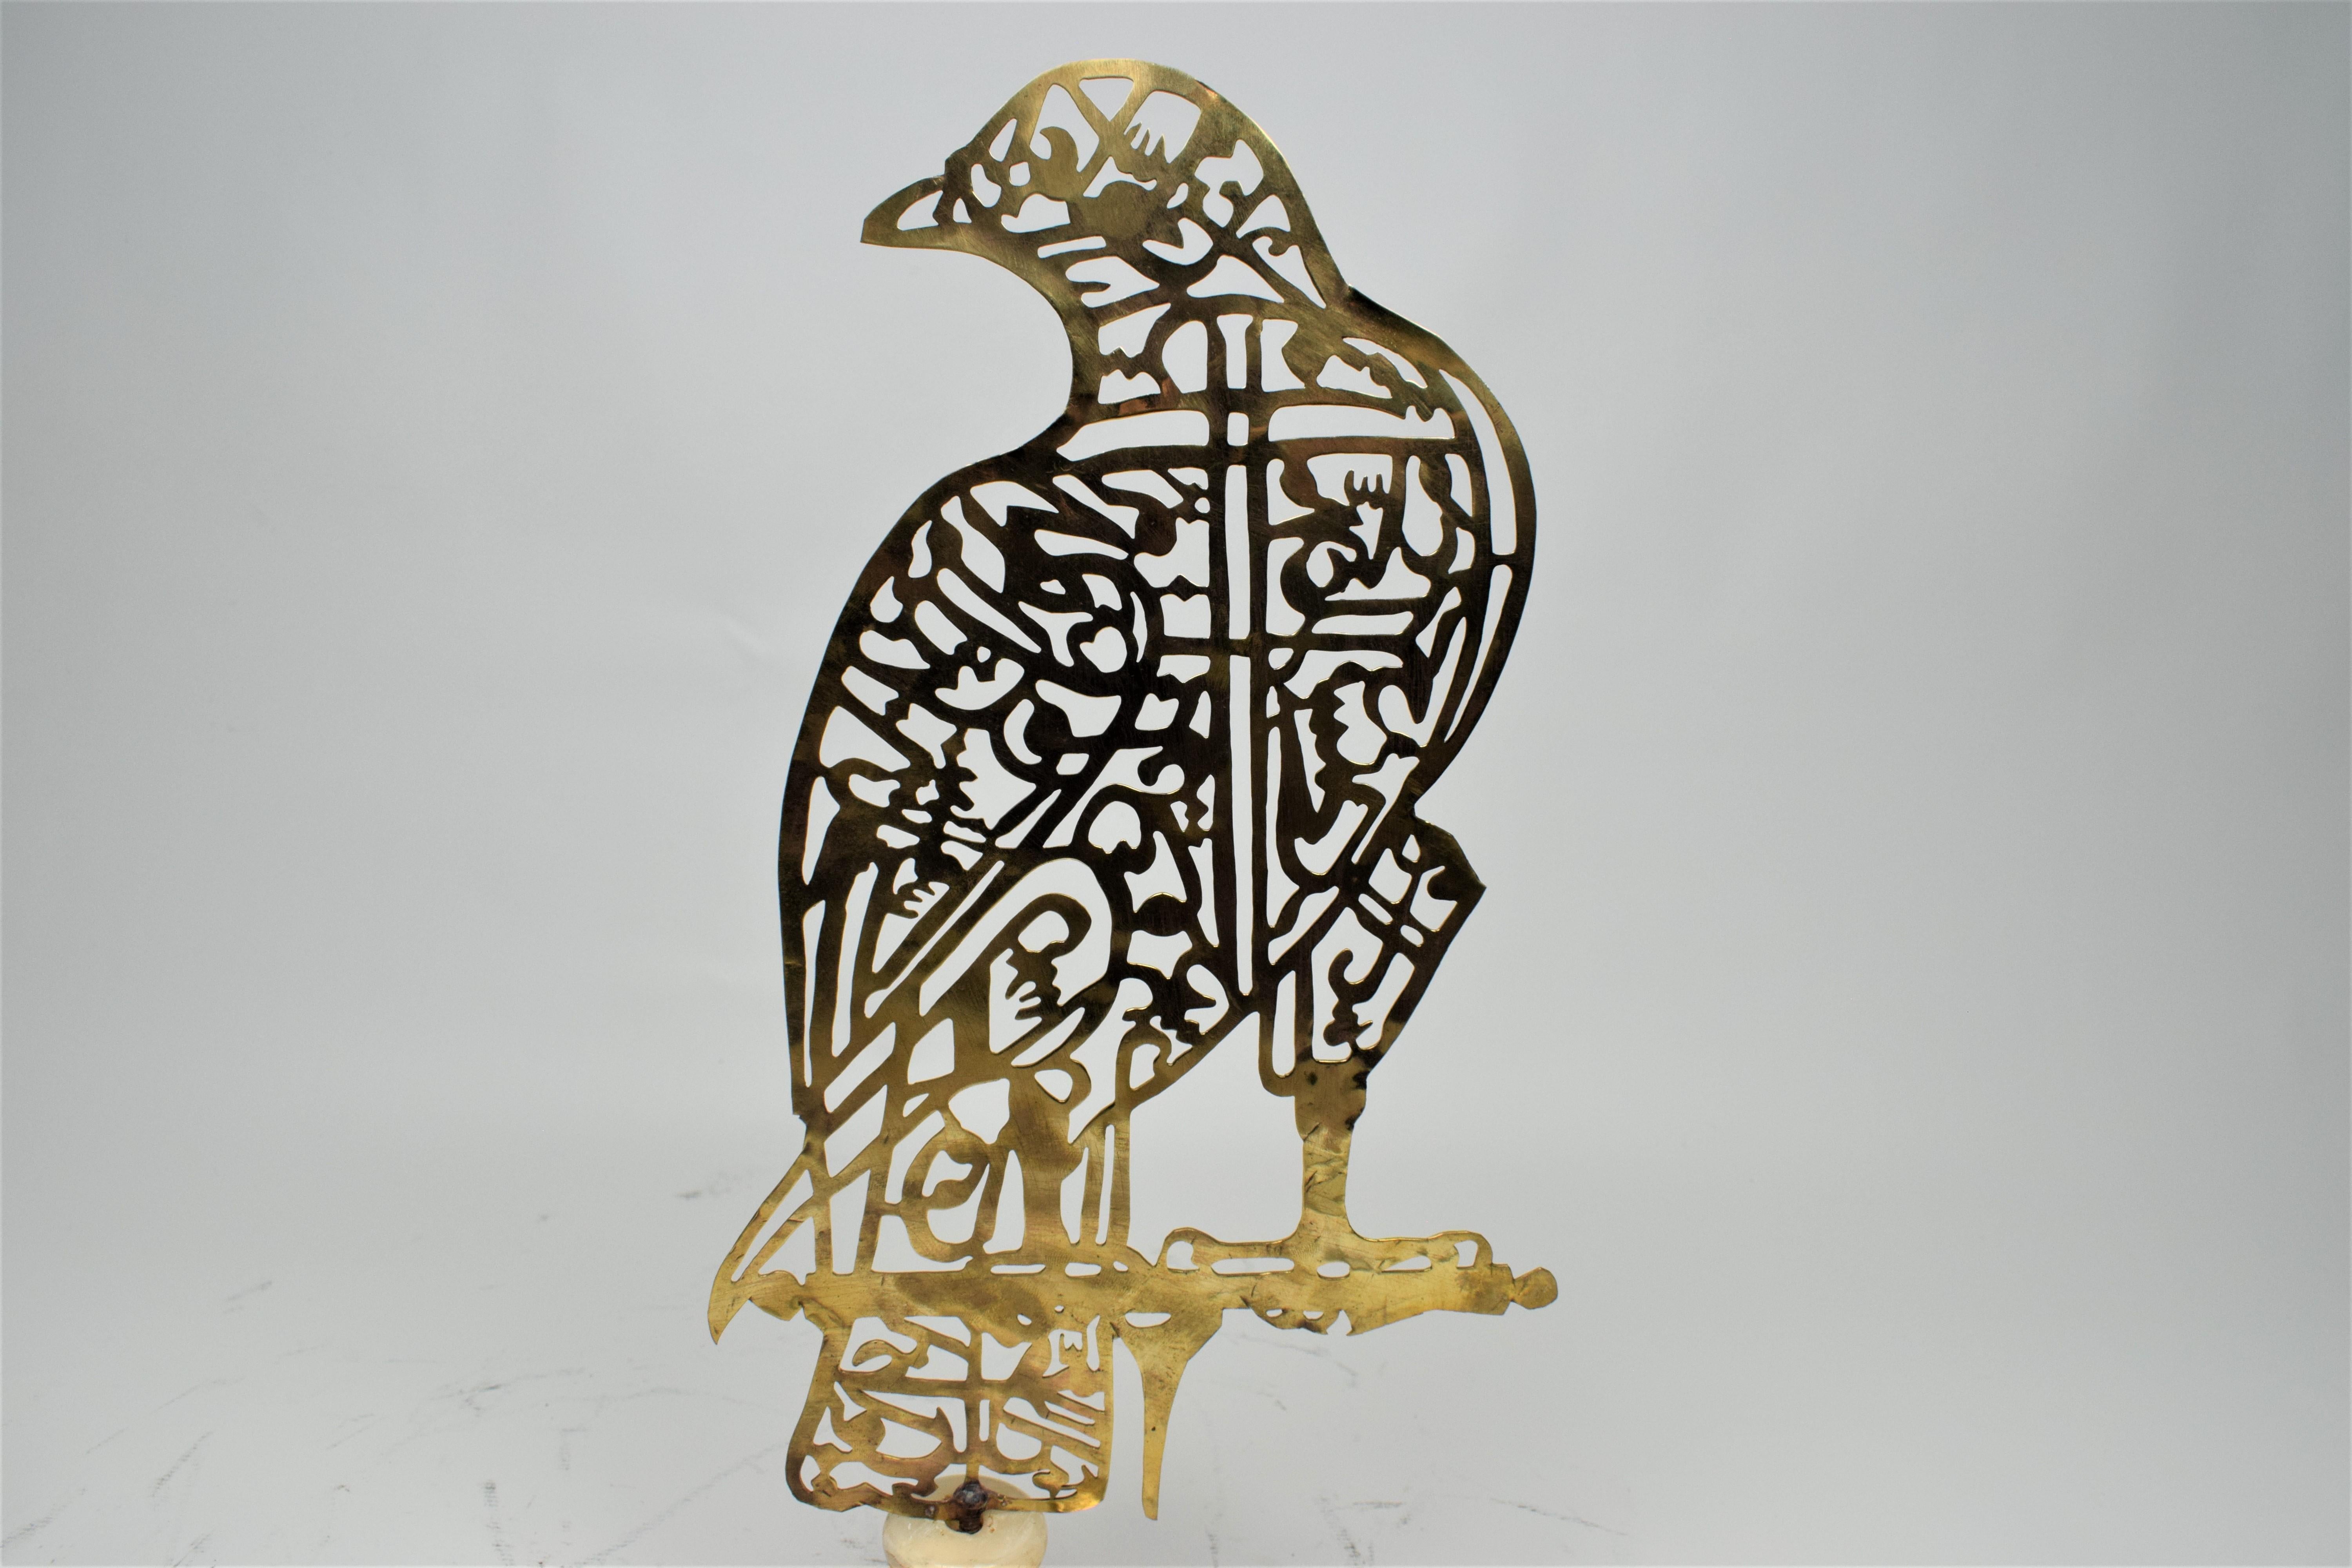 Brass Alam Persian hand Cutwork Calligraphy in the shape of a falcon, 20th century.

The ornamental calligraphy arranged within a frame of a bird of prey -The Falcon. The letters are those of the Shia Muslim prayer, the Nad-i-Ali, or 'Call to